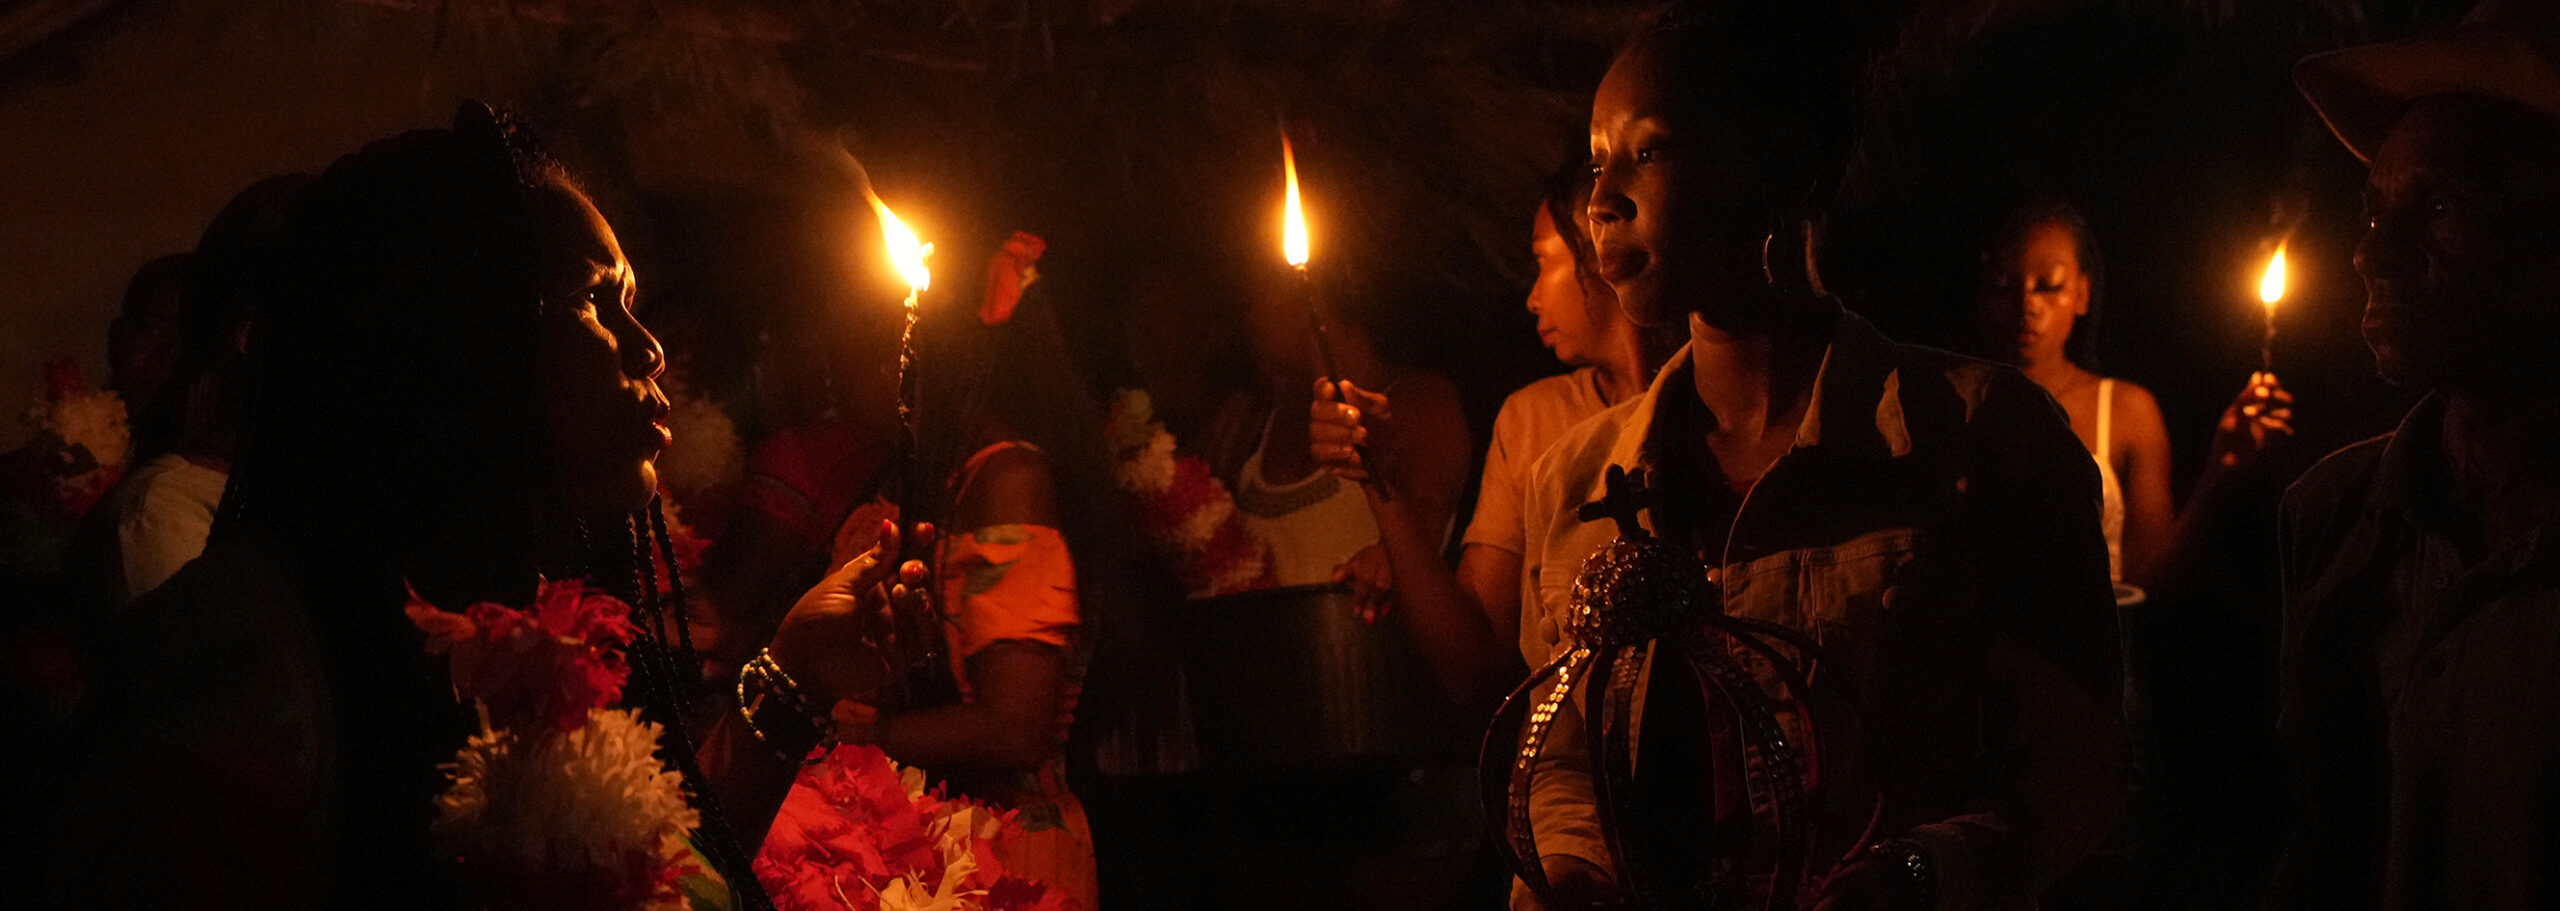 A member of the Kalunga quilombo, the descendants of runaway slaves, prepares to attend the candle procession during the culmination of the week-long pilgrimage and celebration for the patron saint "Nossa Senhora da Abadia" or Our Lady of Abadia, in the rural area of Cavalcante in Goias state, Brazil, Saturday, Aug. 13, 2022. Devotees celebrate Our Lady of Abadia at this time of the year with weddings, baptisms and by crowning distinguished community members, as they maintain cultural practices originating from Africa that mix with Catholic traditions. (AP Photo/Eraldo Peres)